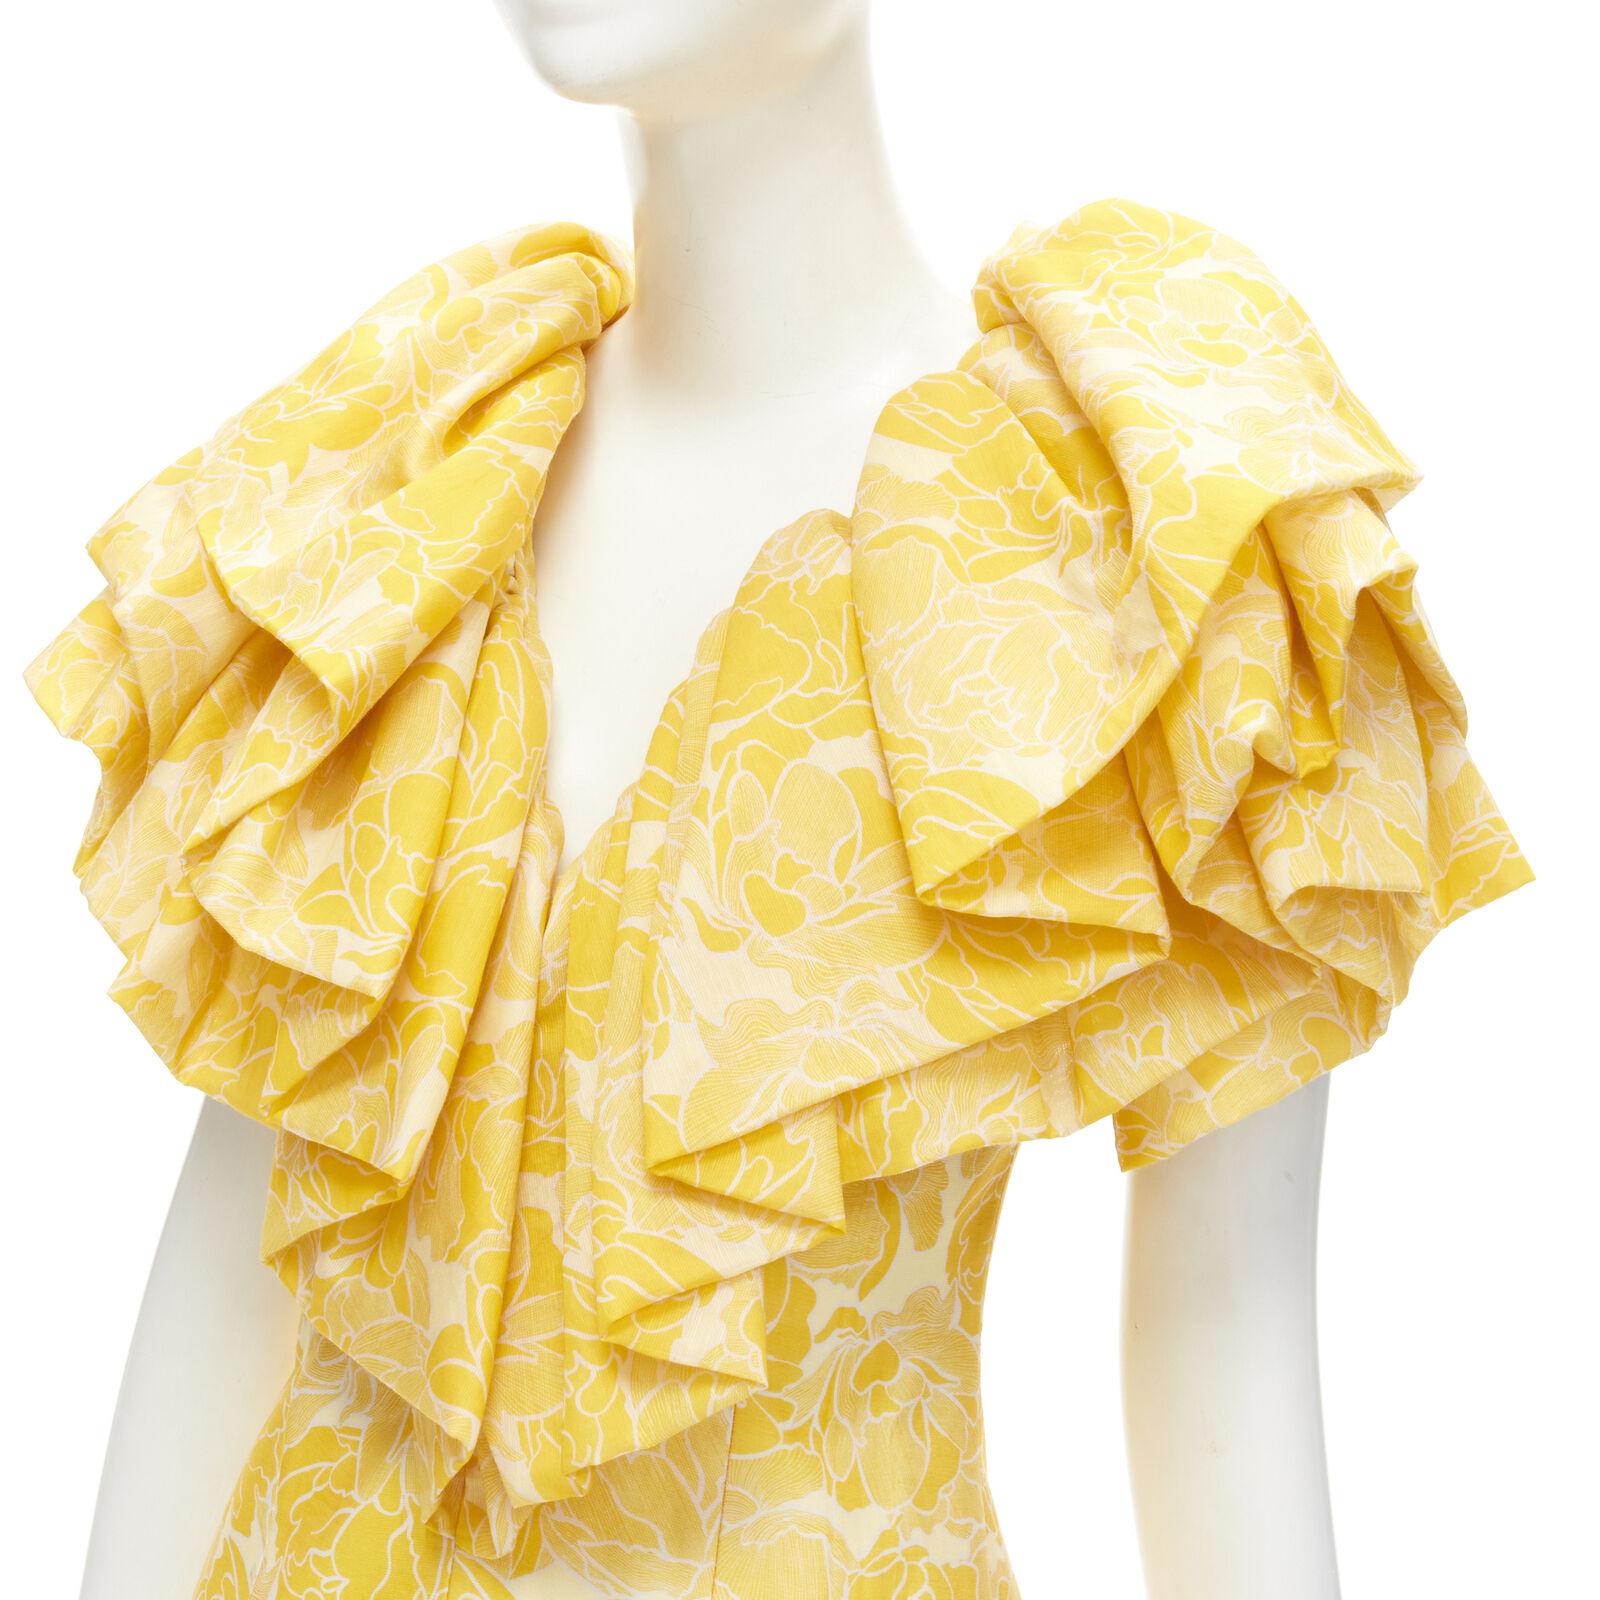 ACLER yellow floral print ruffle sweetheart neckline sheath dress US2 XS
Reference: AAWC/A00043
Brand: Acler
Material: Cotton
Color: Yellow
Pattern: Floral
Closure: Zip
Lining: Unlined
Extra Details: Ruffle collar. Plunge sweetheart neckline.